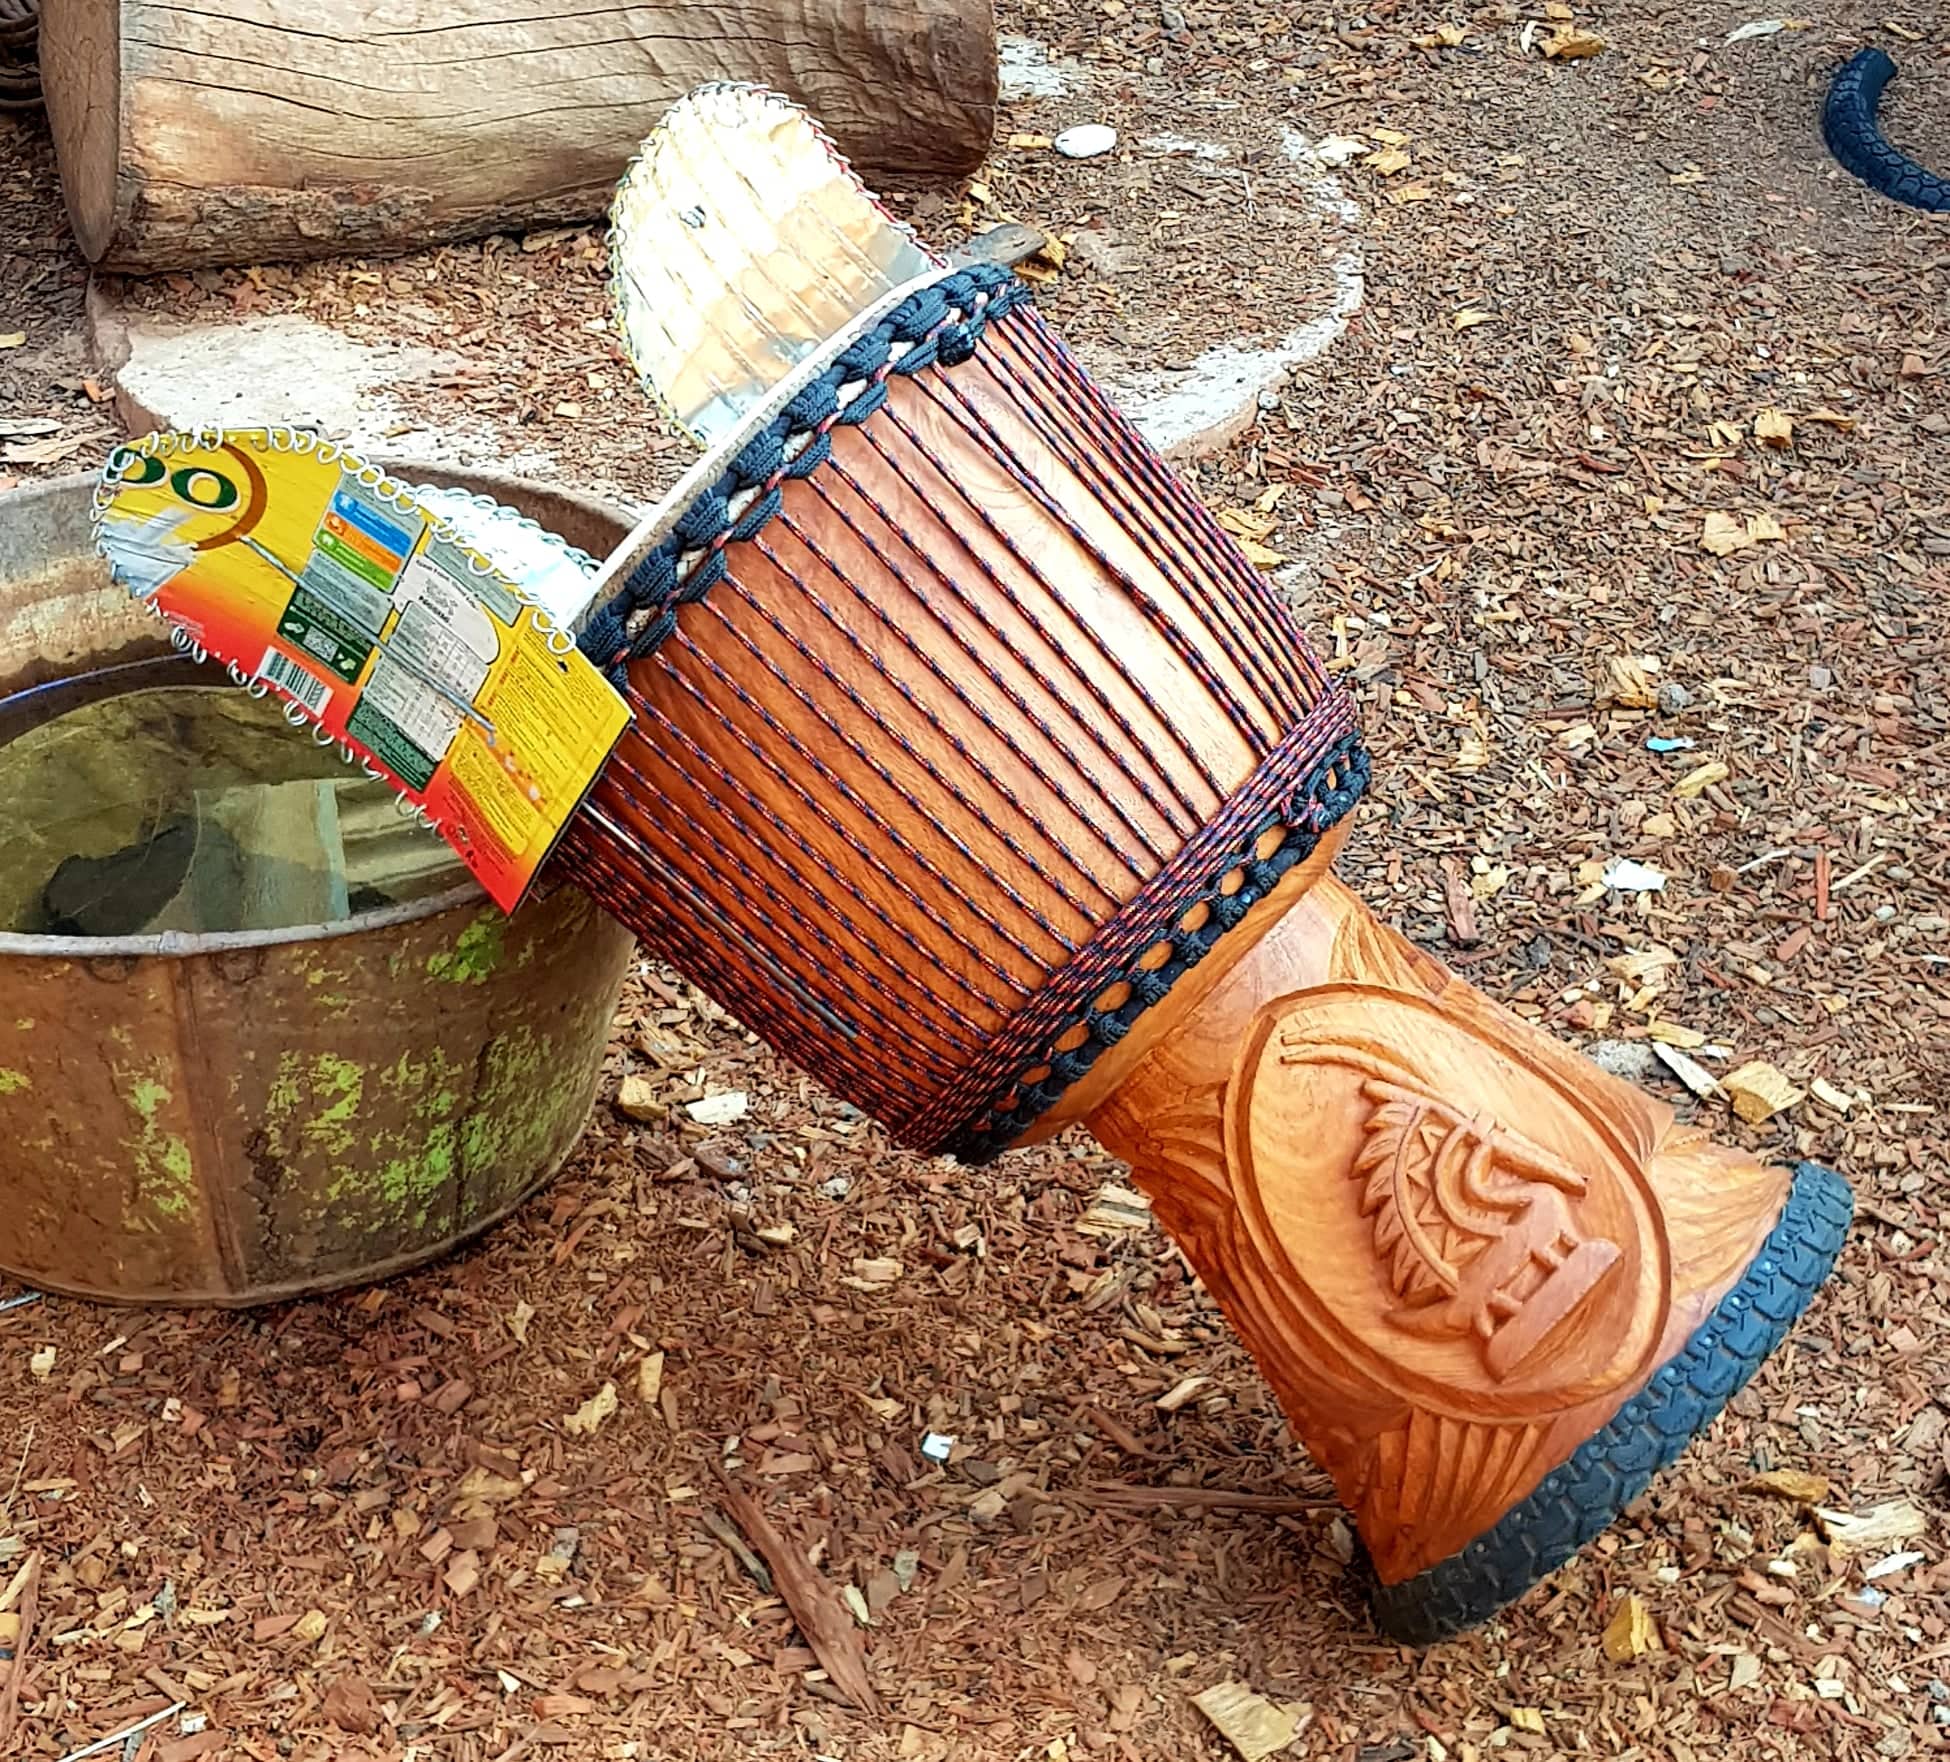 Where To Buy A Djembe Drum? The Best Djembes.